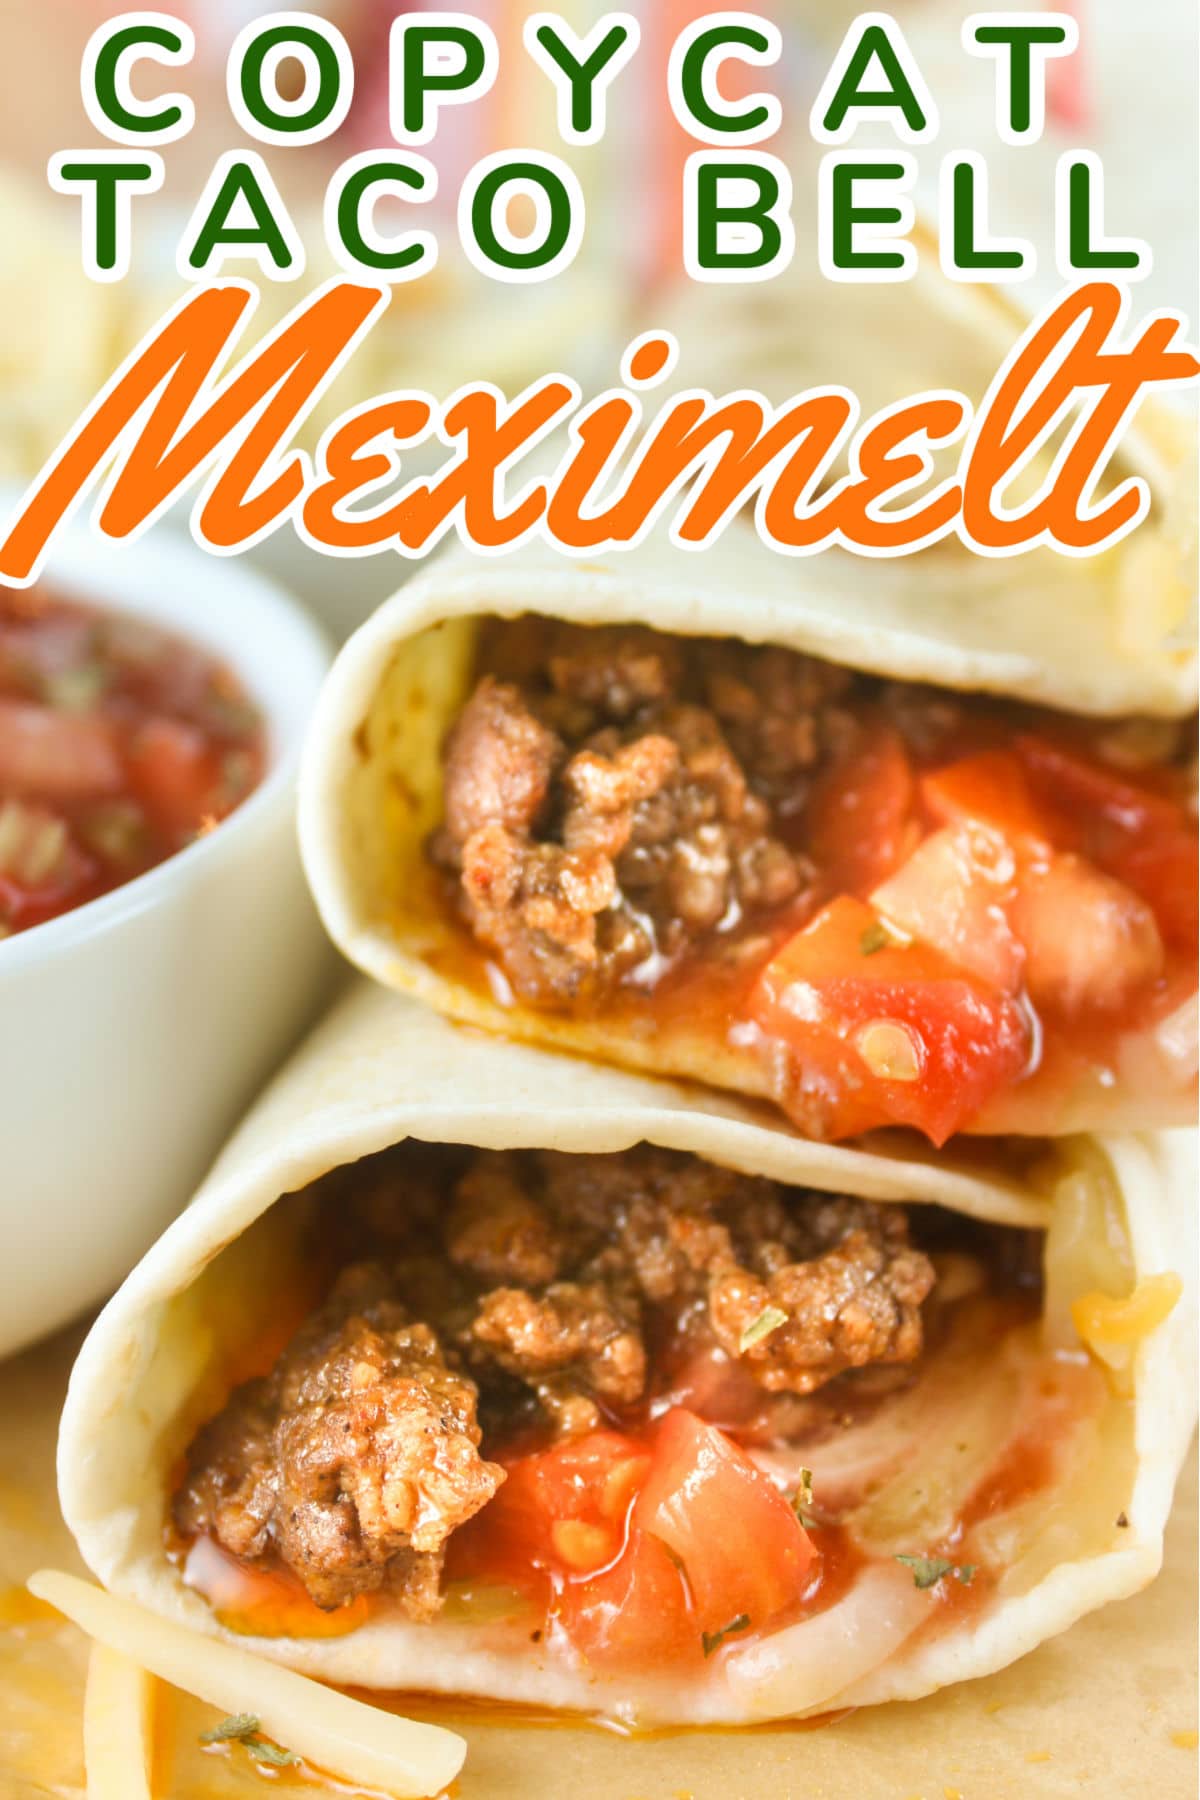 The Meximelt at Taco Bell was one of my absolute favorite menu items - but it's no longer on the menu! Ugh - the tragedy! This Copycat Meximelt brings it back to your kitchen by combining a taco and a quesadilla into a melty taco of goodness.  via @foodhussy